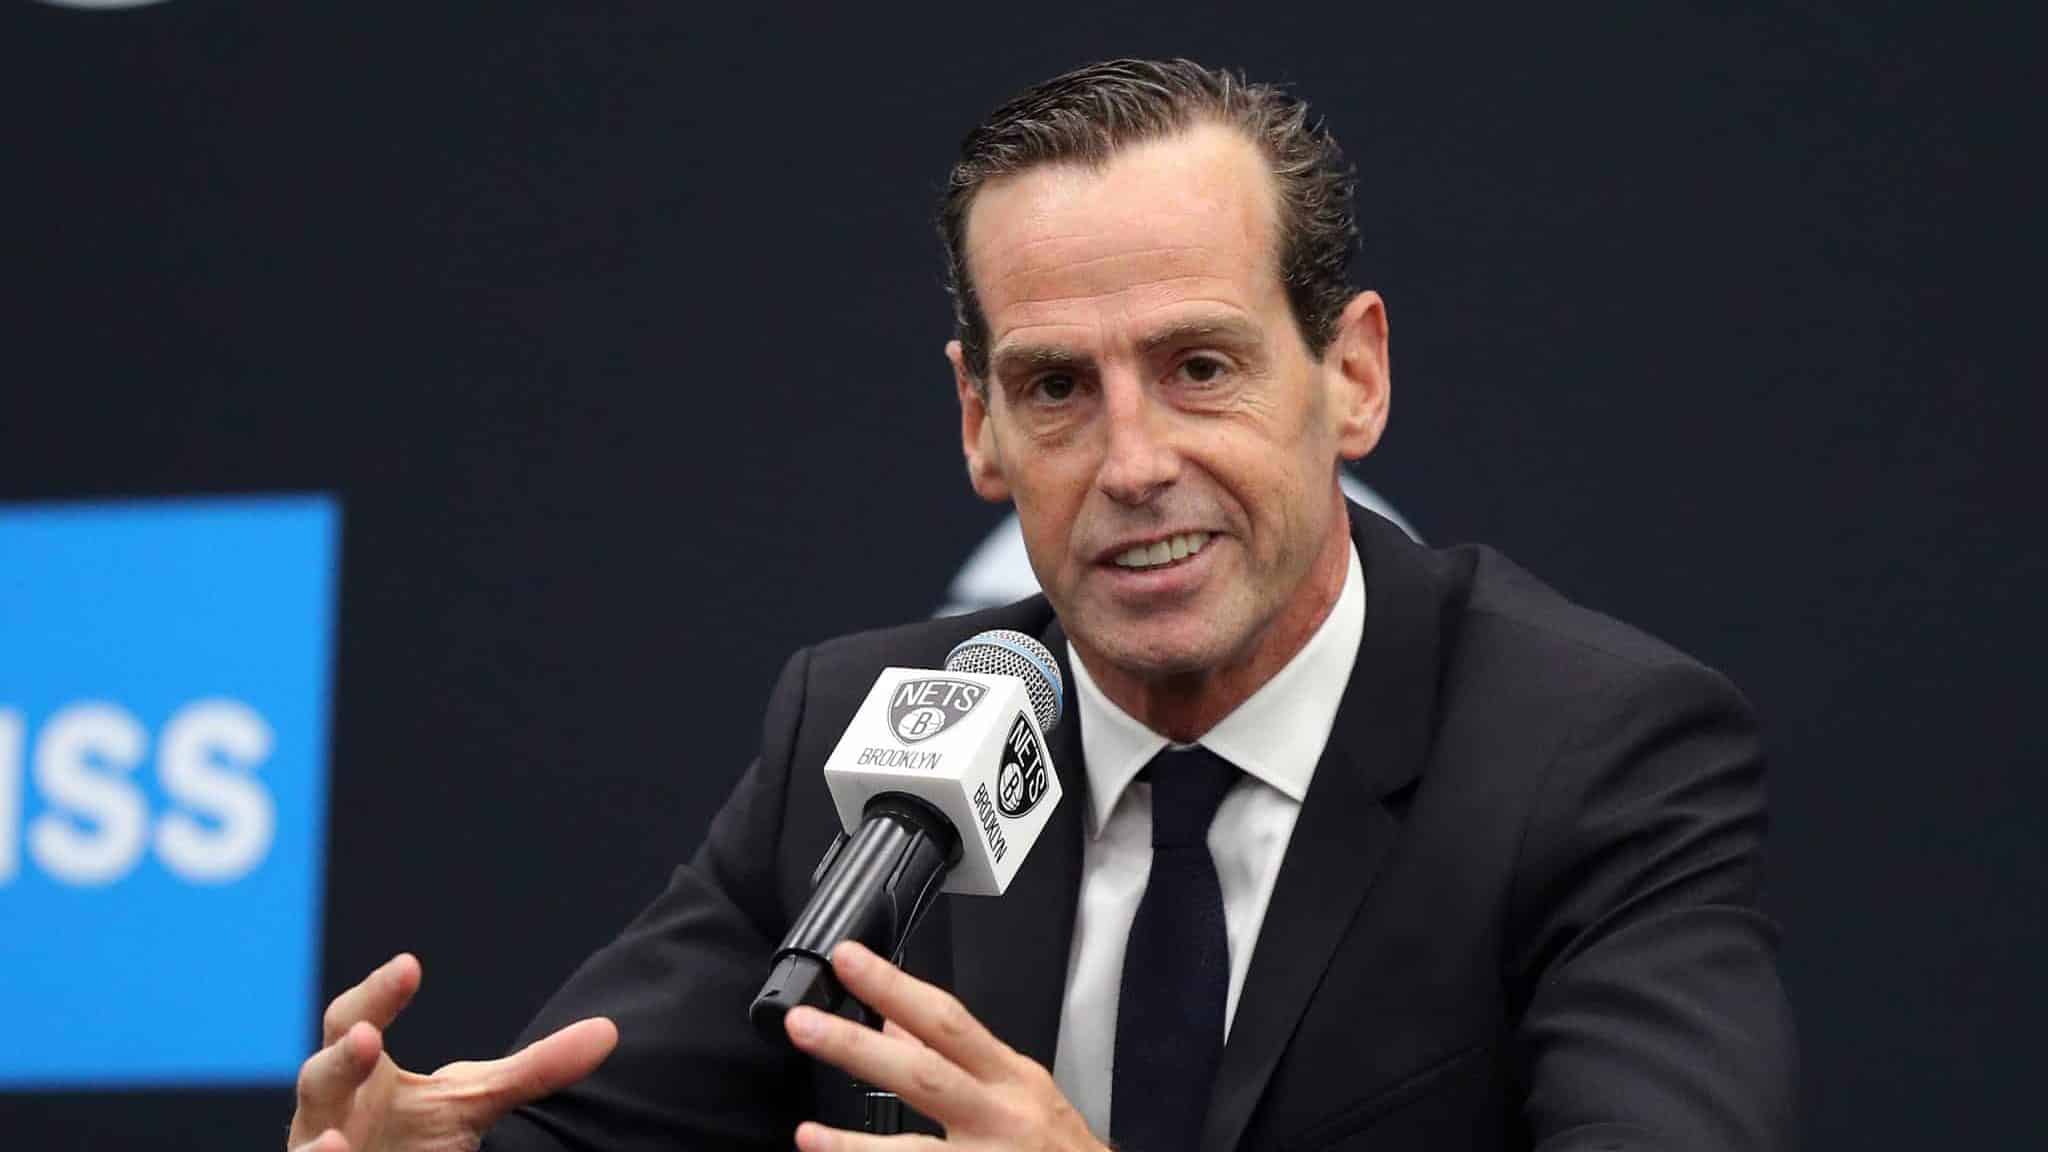 NEW YORK, NEW YORK - SEPTEMBER 27: Head coach Kenny Atkinson speaks to media during Brooklyn Nets Media Day at HSS Training Center on September 27, 2019 in the Brooklyn Borough of New York City. NOTE TO USER: User expressly acknowledges and agrees that, by downloading and or using this photograph, User is consenting to the terms and conditions of the Getty Images License Agreement.